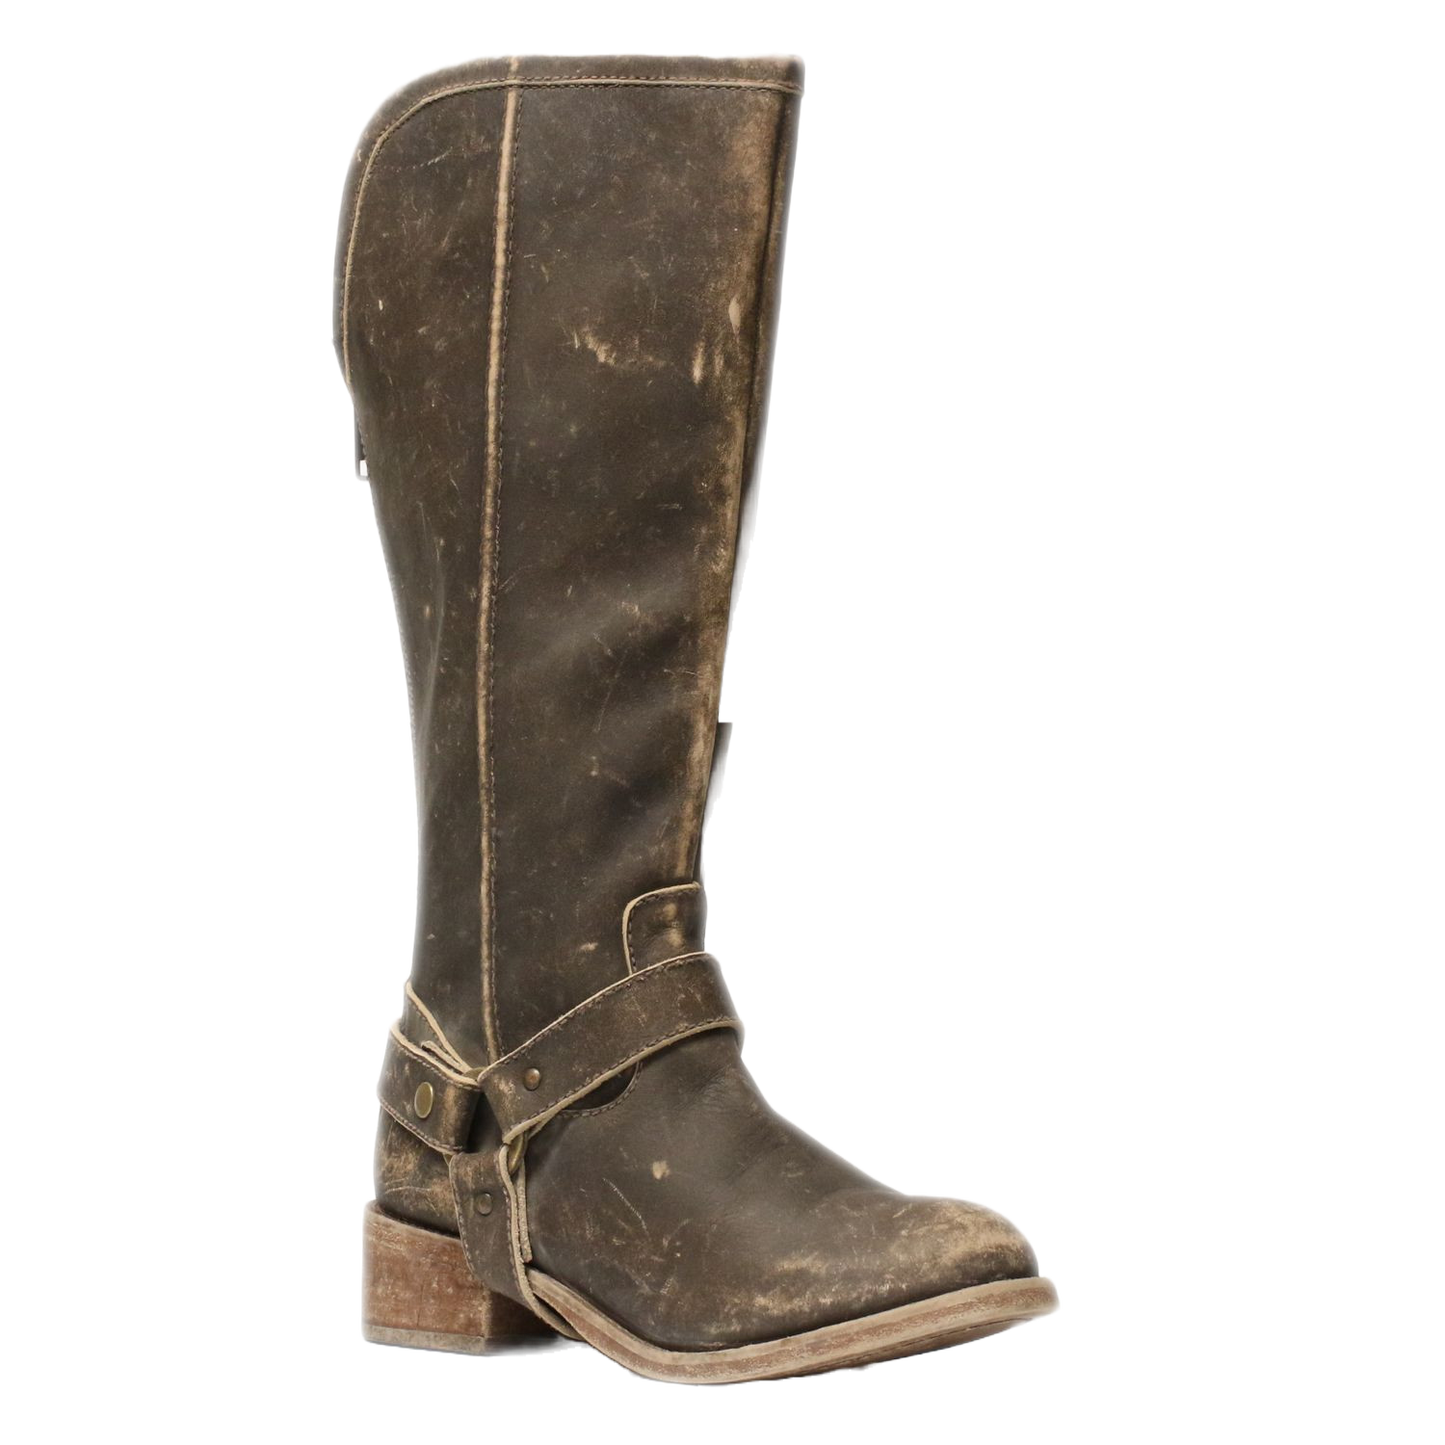 Corral Ladies Distressed Brown Tall Harness Boots P5100